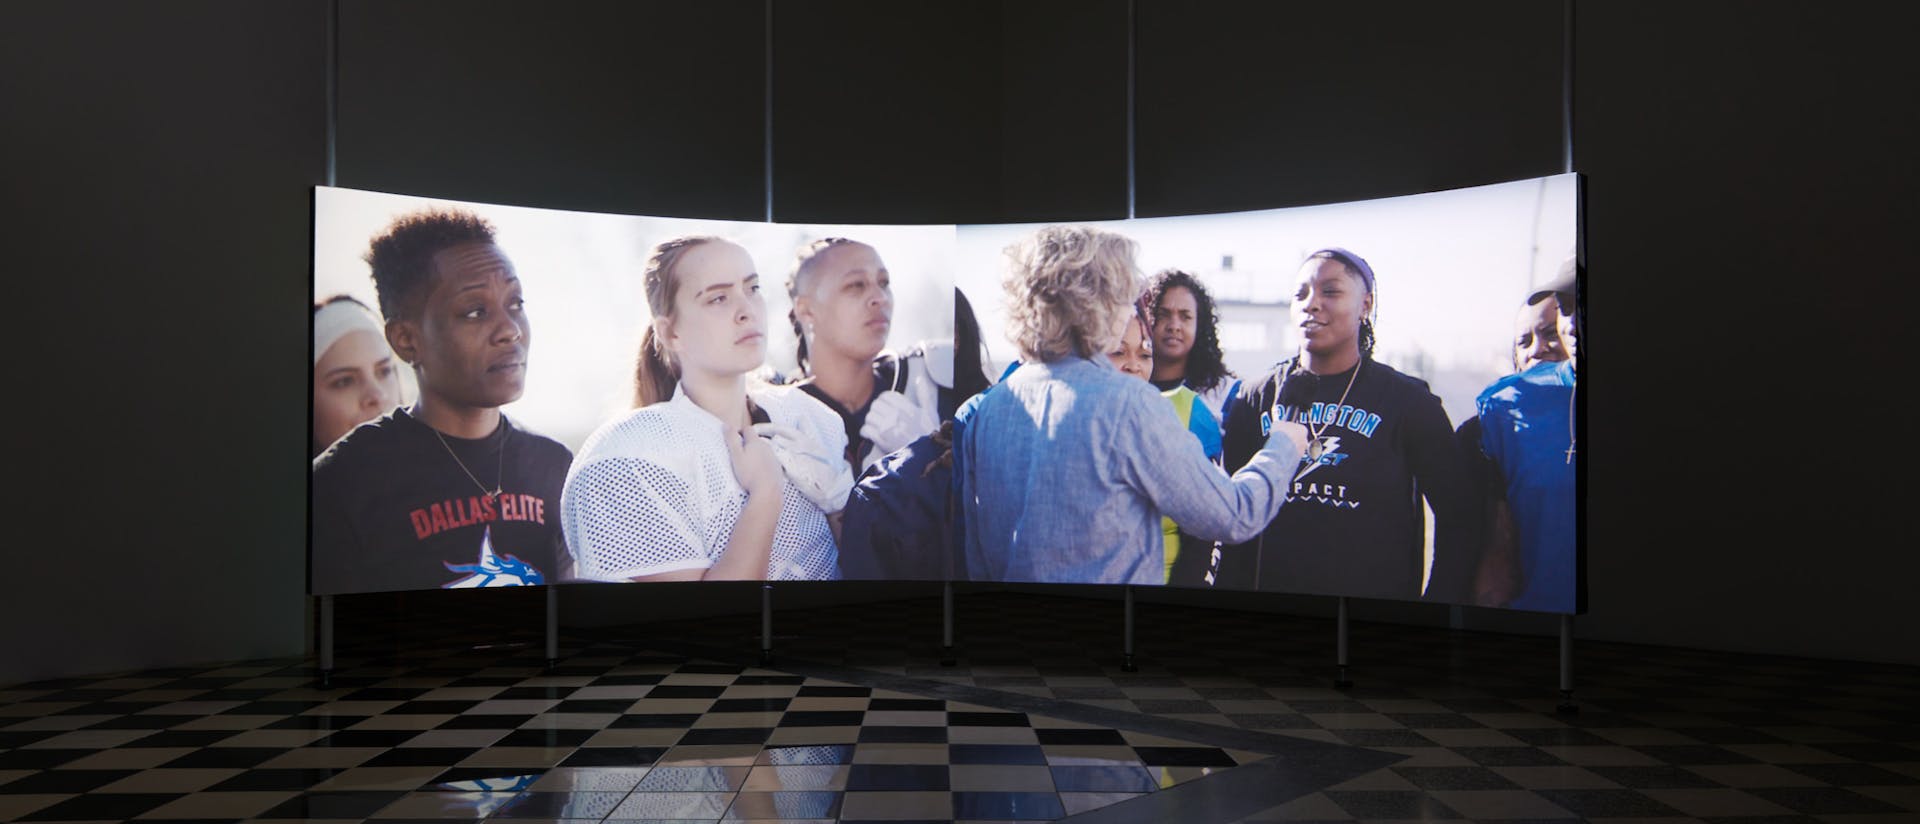 A dark gallery space with checkered stone floors and a large, concave projection screen curved to fit the shape of the room. On the projection screen, two video frames are displayed. On the left half of the screen is an image of four women athletes turned to listen to an offscreen speaker. One is wearing a crewneck that says, 